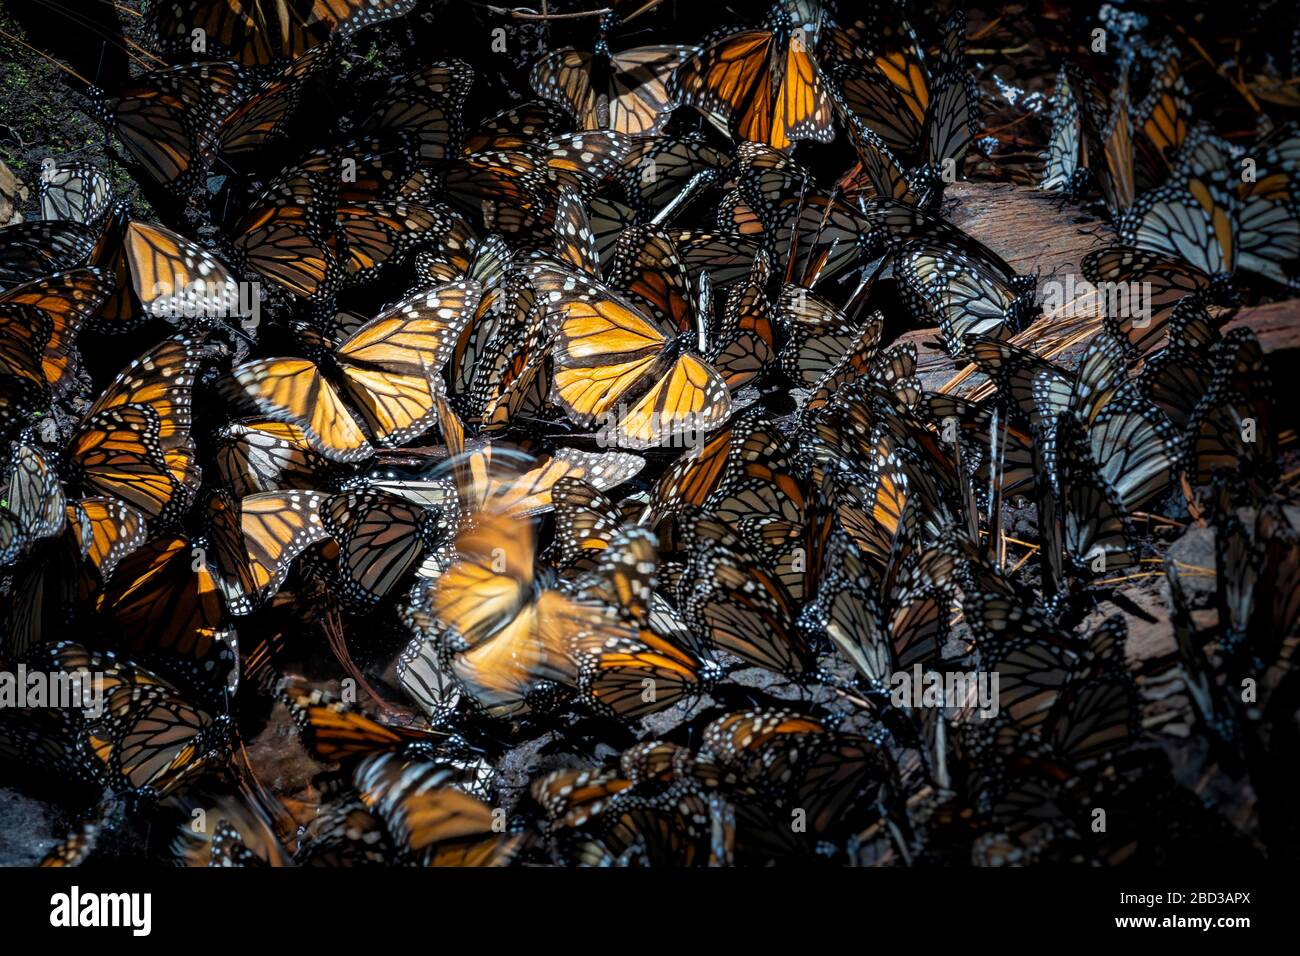 Hundreds of monarch butterflies maneuver for a drink of water in the Rosario Sanctuary of Michoacan, Mexico. Stock Photo